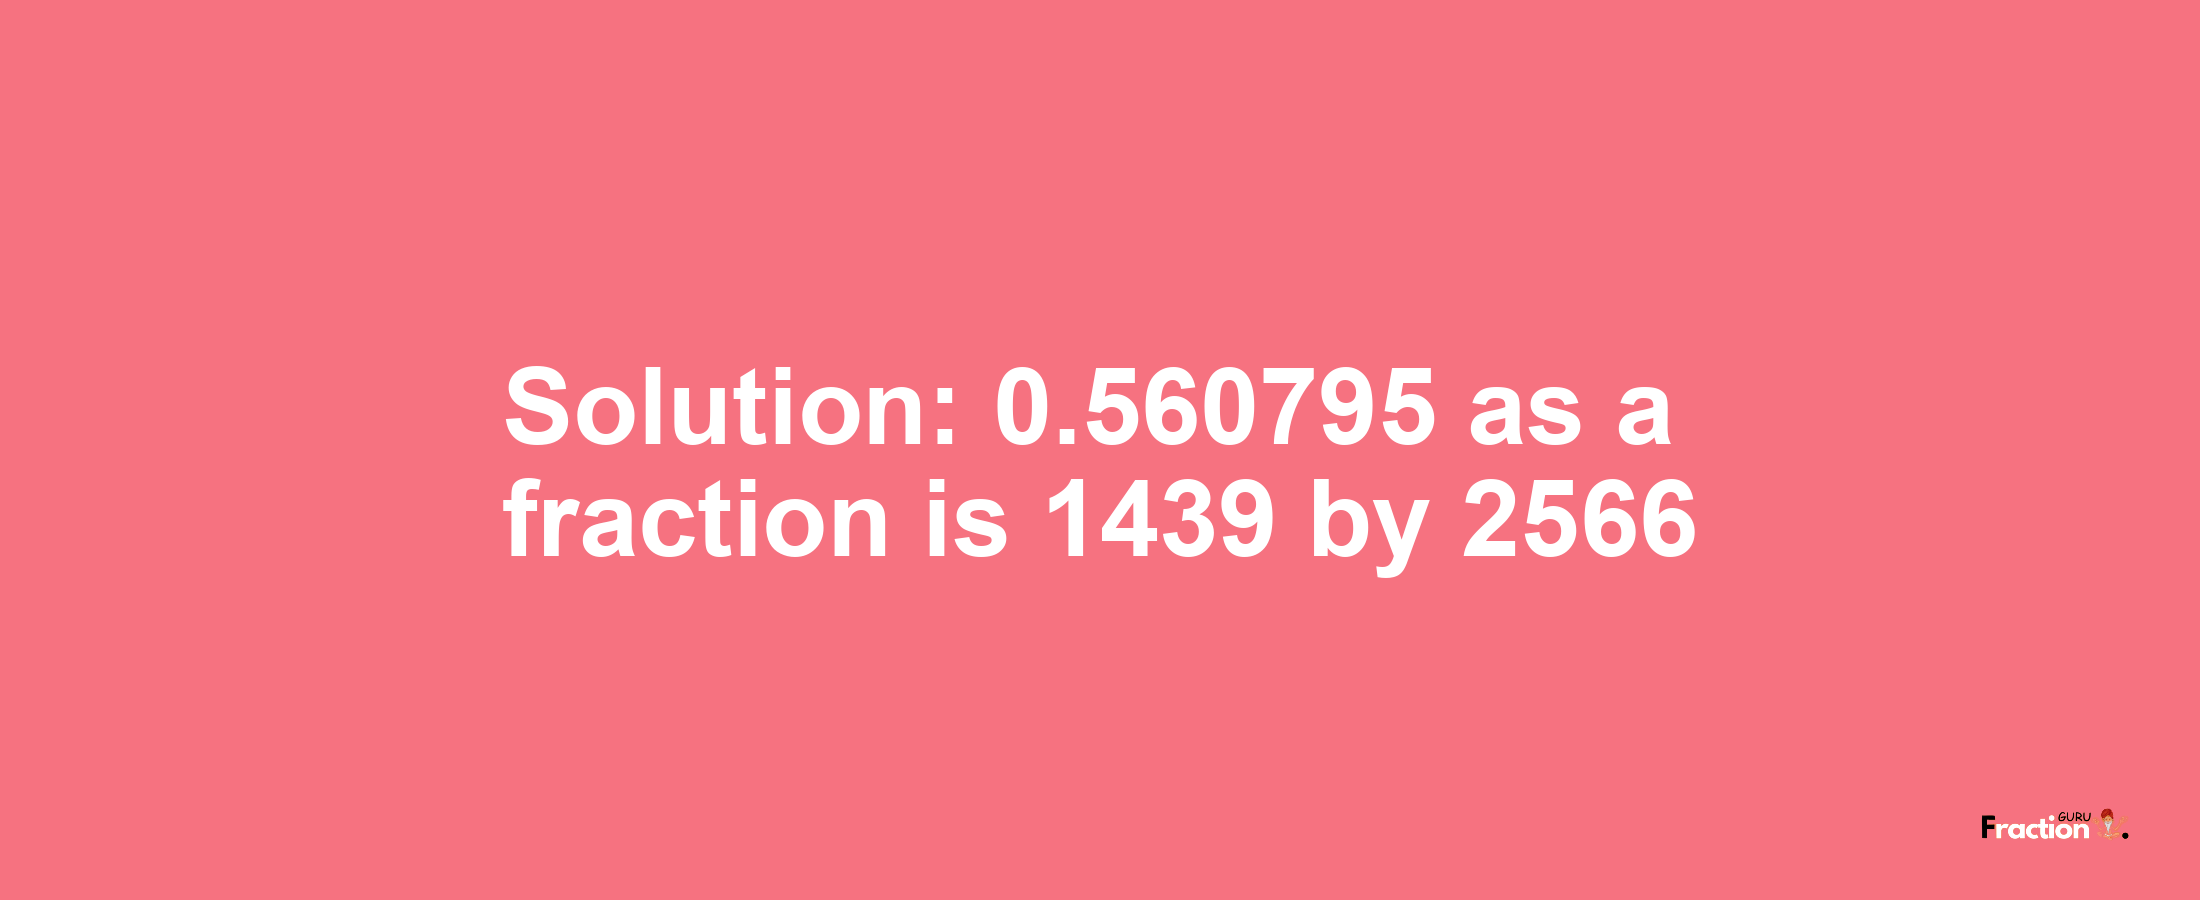 Solution:0.560795 as a fraction is 1439/2566